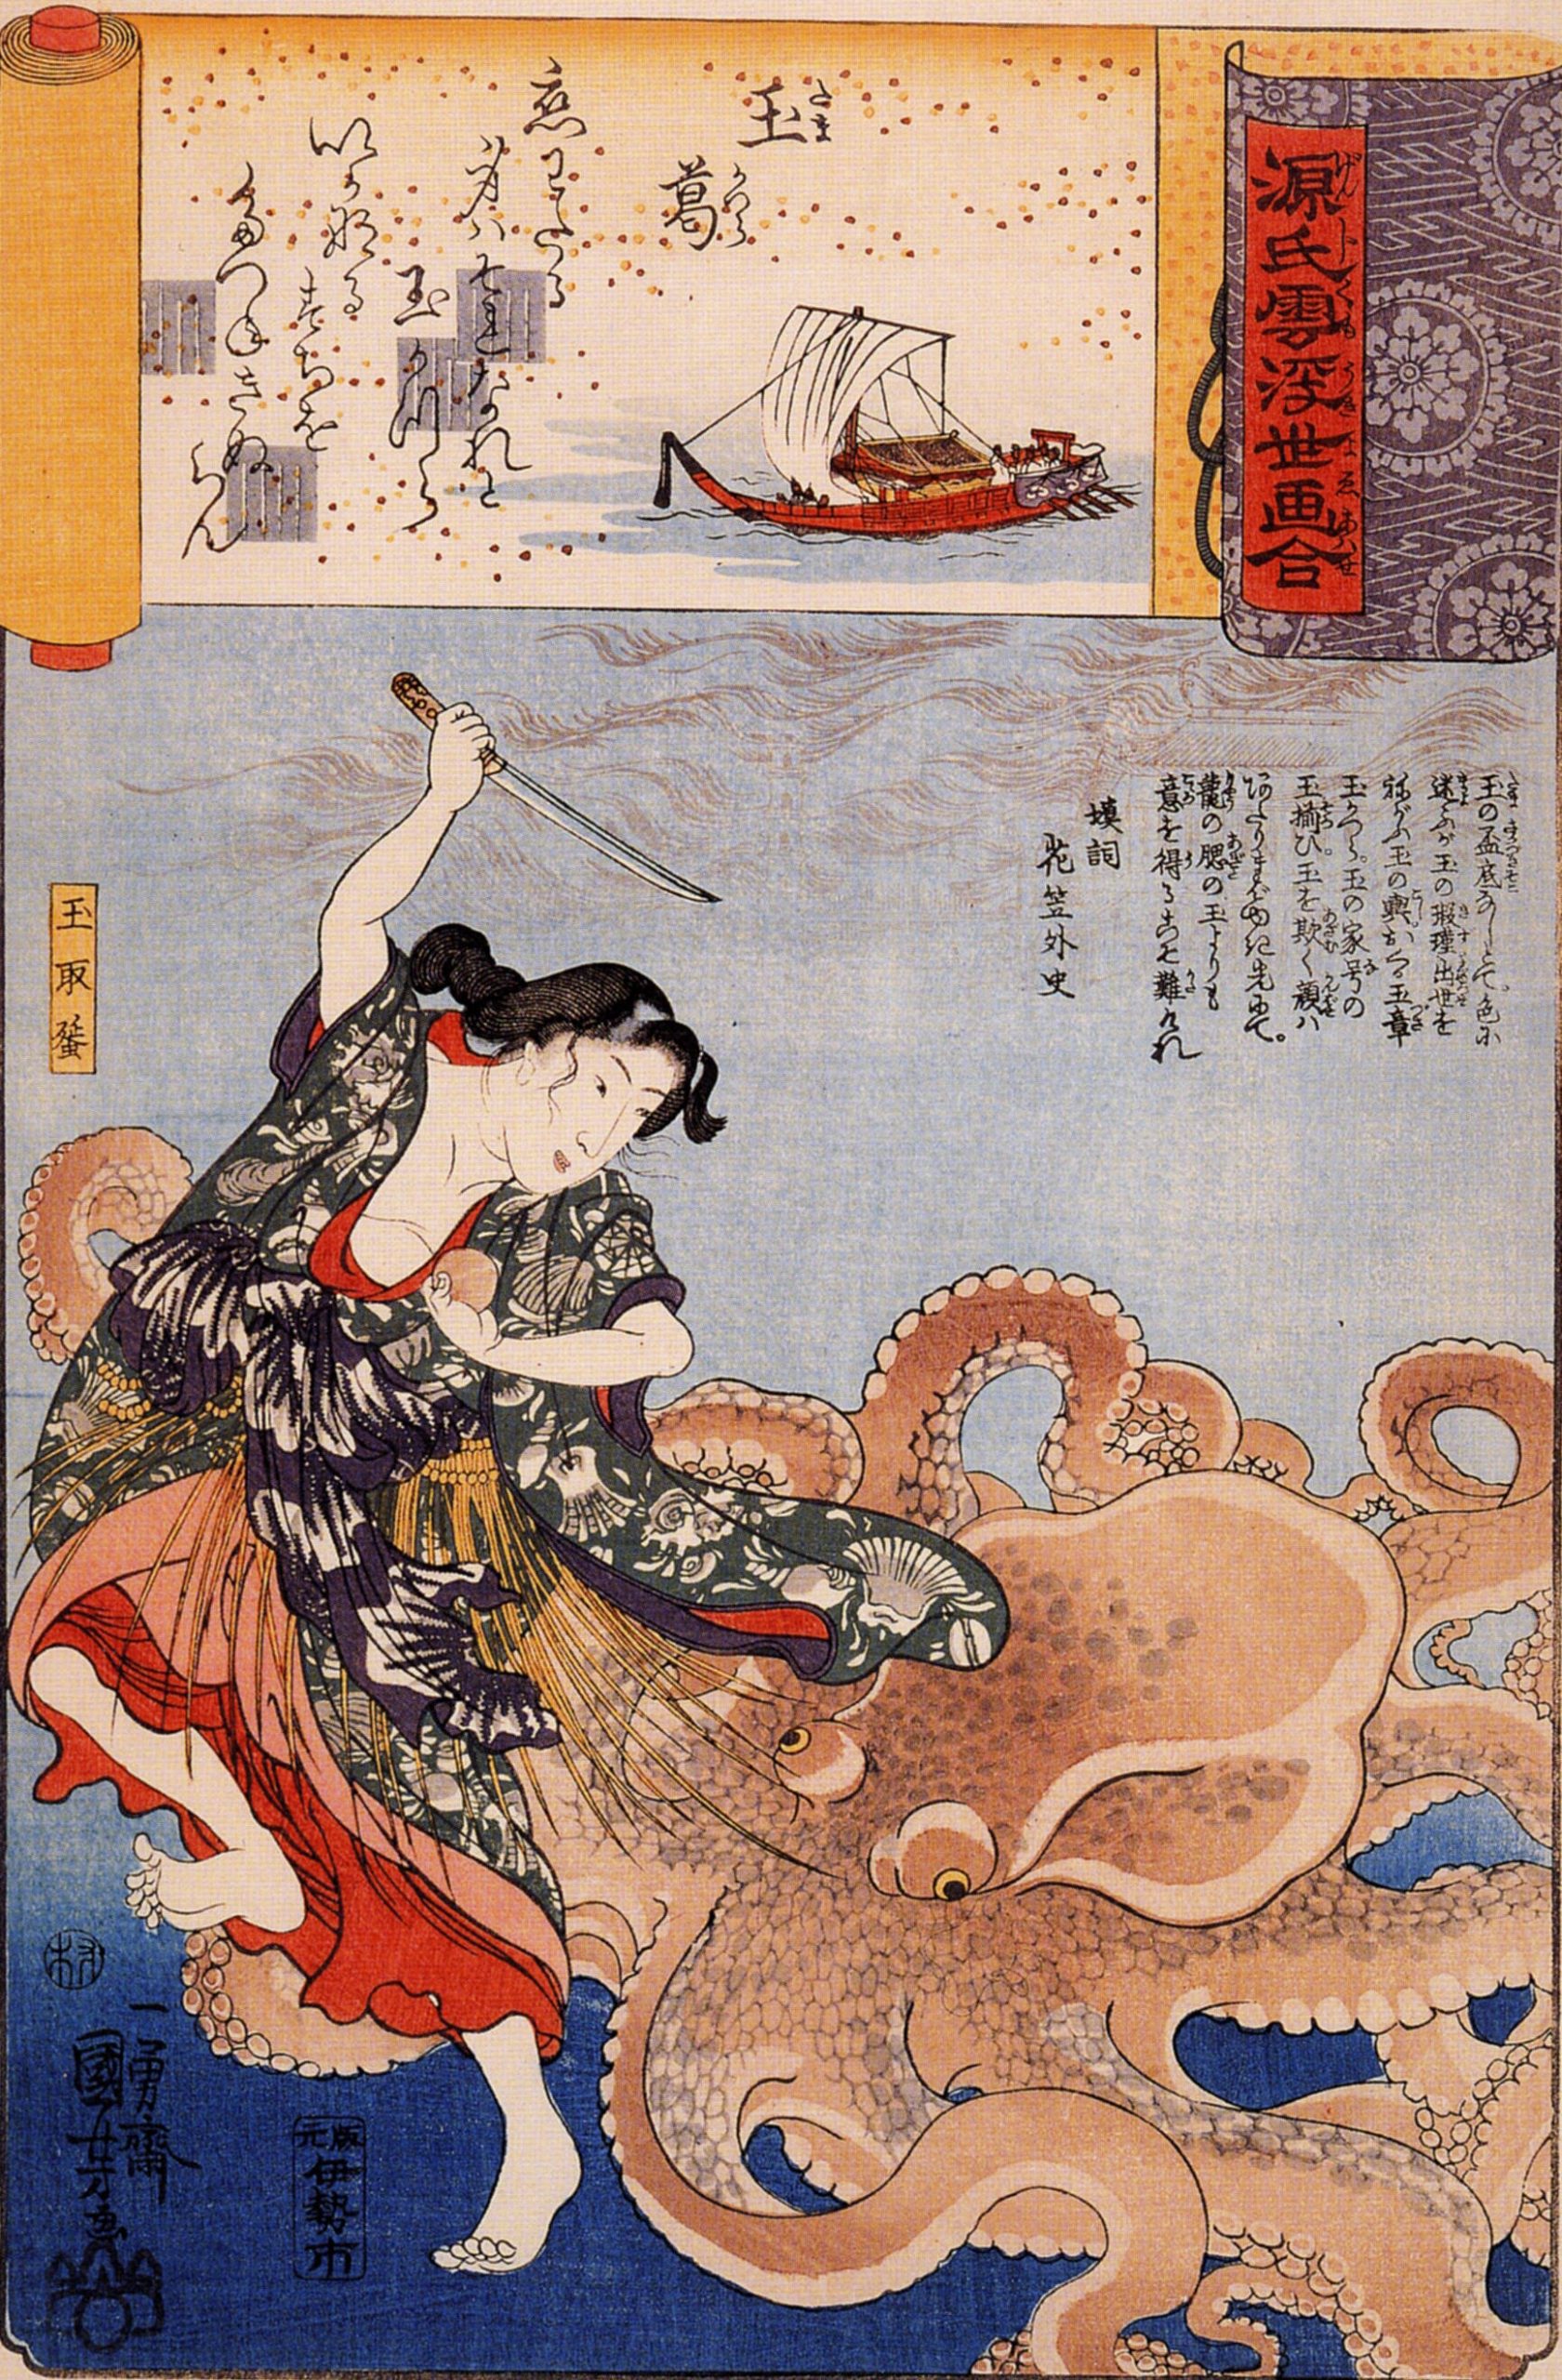 A woman attacks an octopus by pulling the creature's tentacles towards her and pointing a sharp object towards the creature.